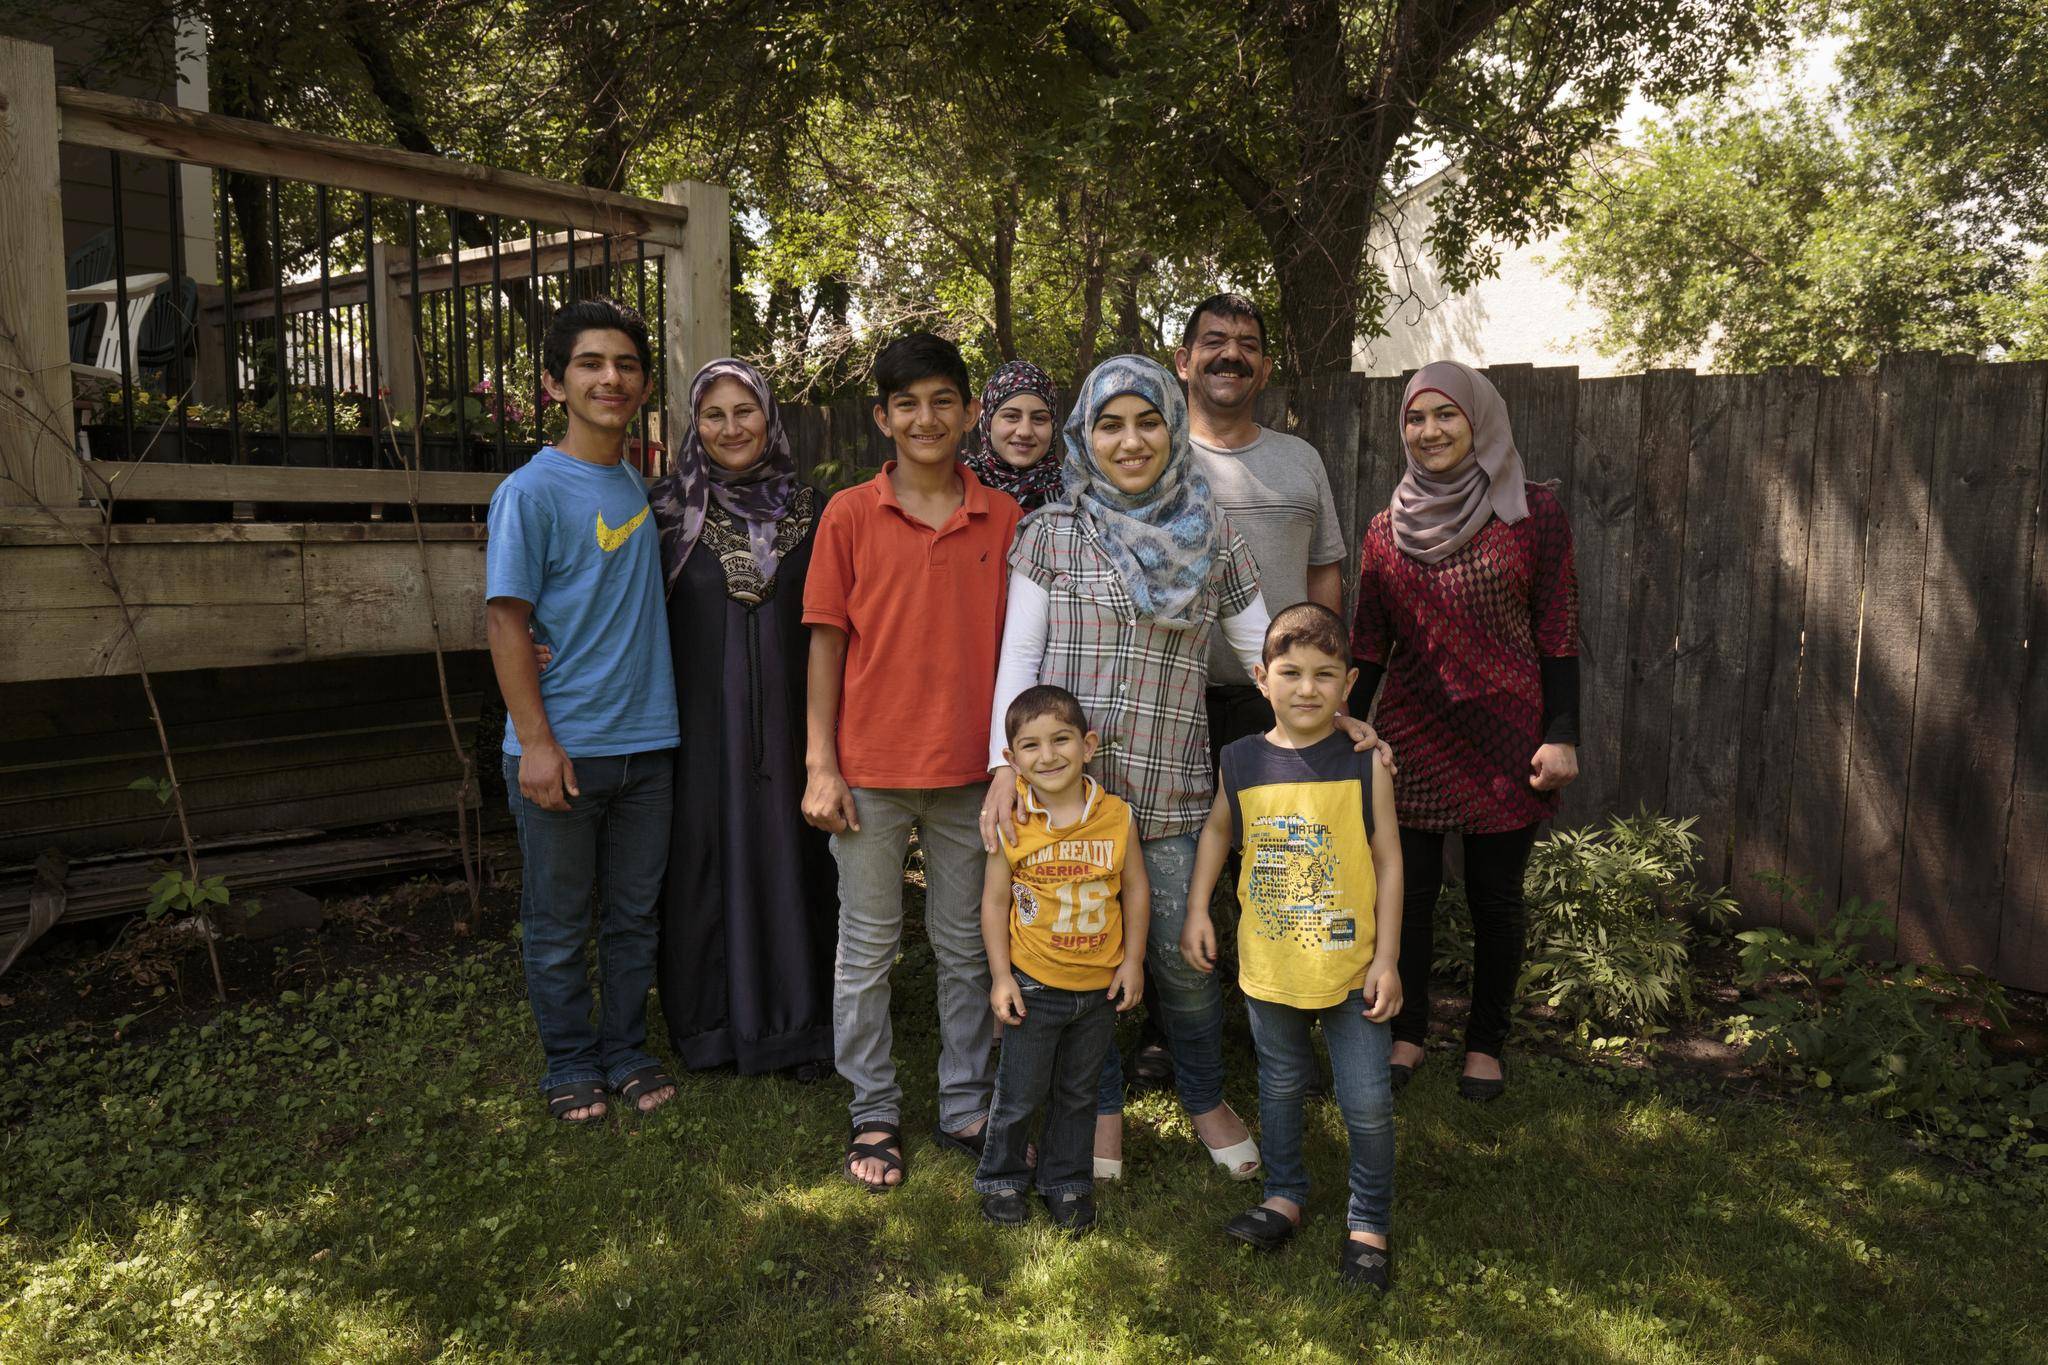 Welcome to the country: Refugees are helping a prairie town grow